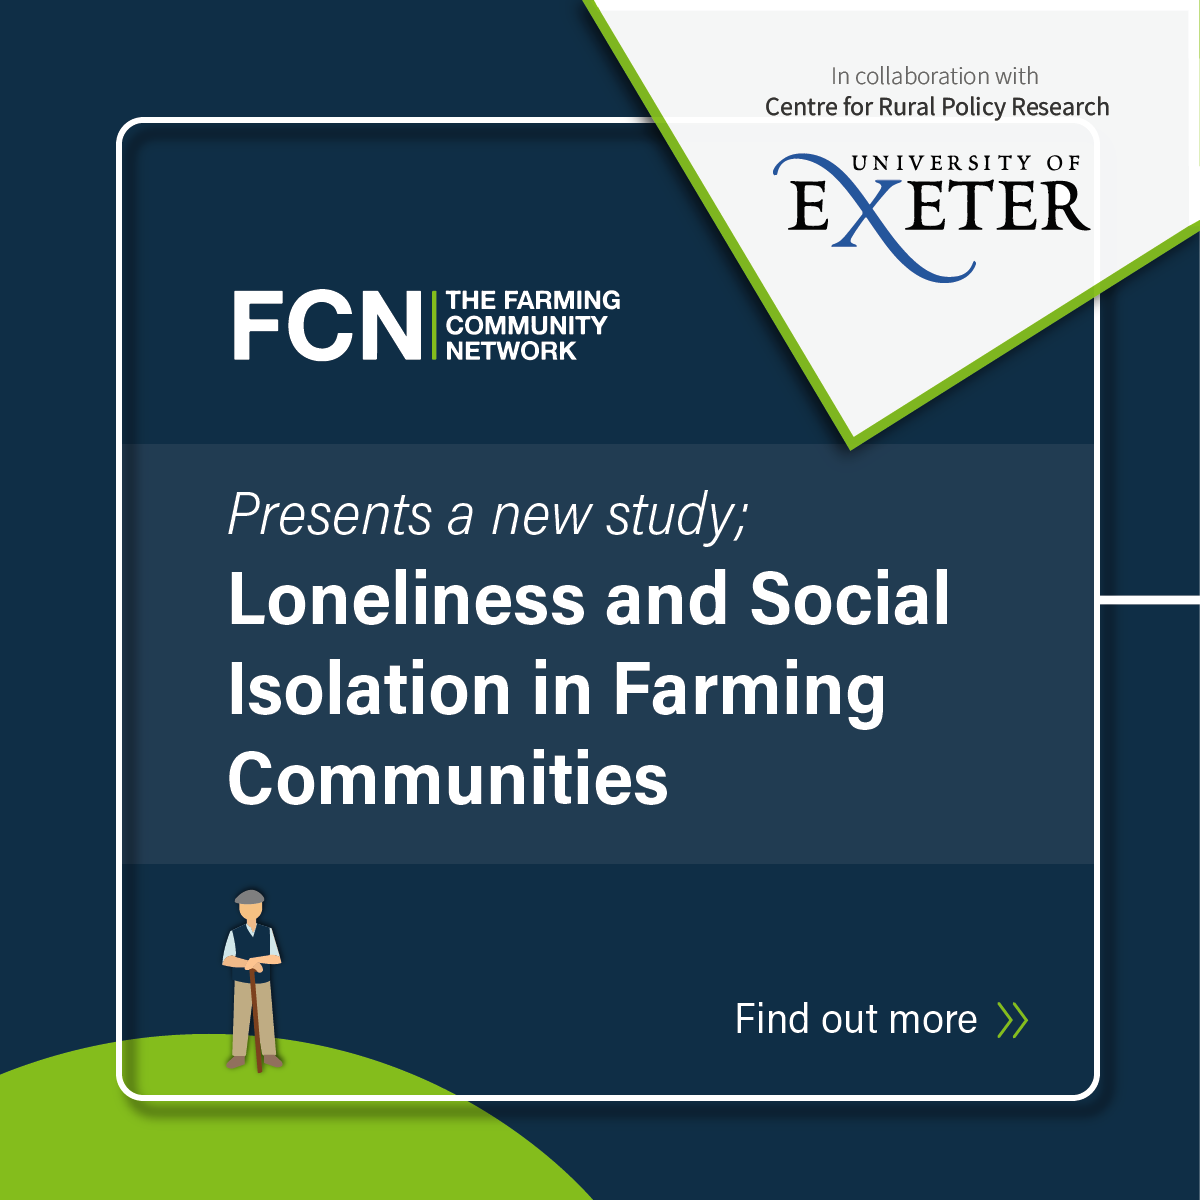 NEW STUDY CALLS FOR “CULTURE CHANGE” IN FARMING TO ADDRESS LONELINESS, ISOLATION AND MENTAL ILL-HEALTH